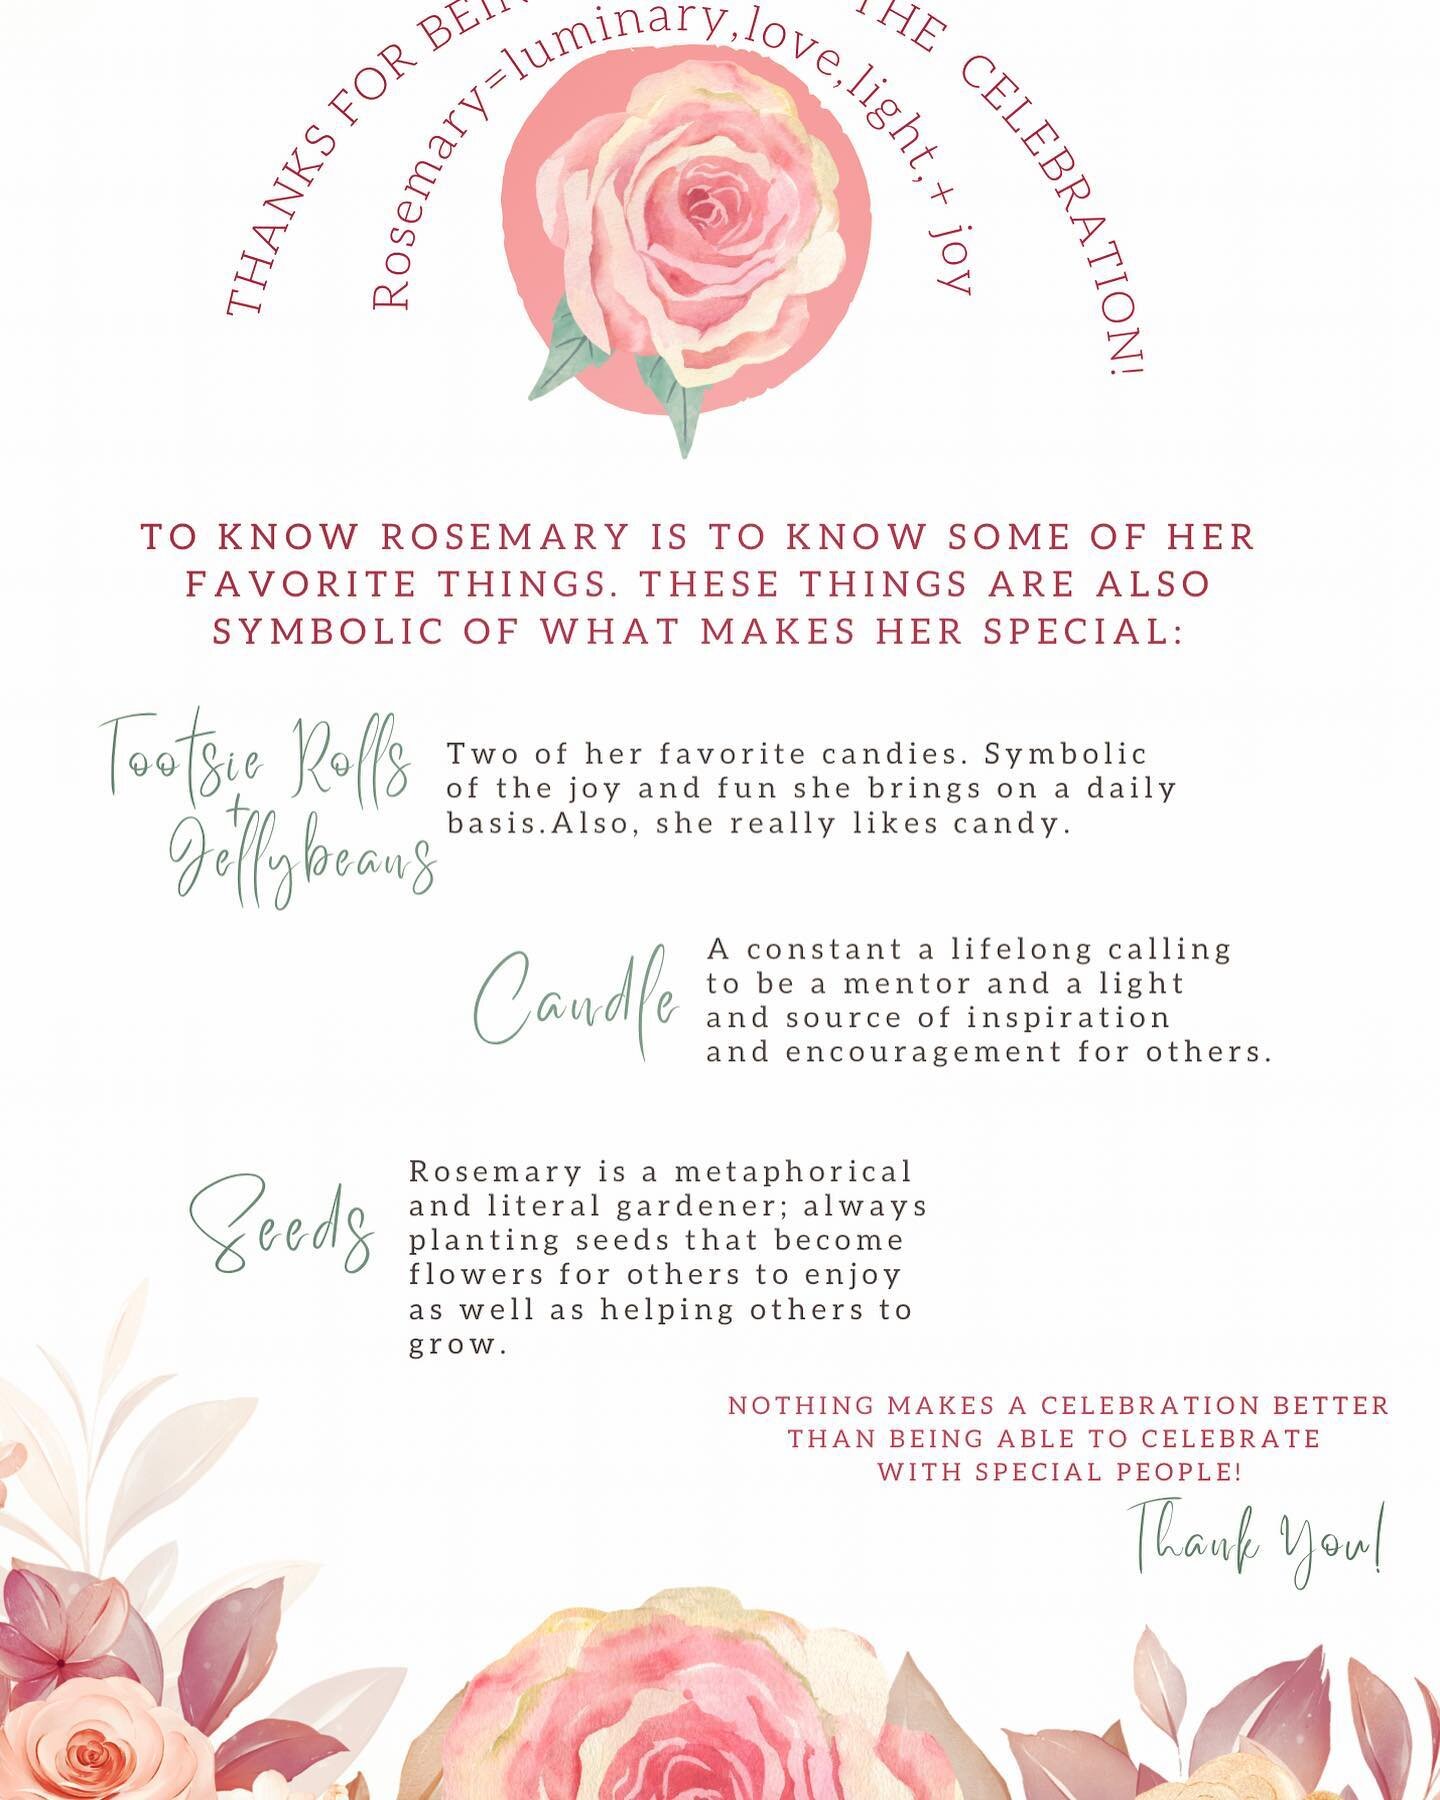 It&rsquo;s funny, I don&rsquo;t always think about the odds and ends I do just for life or to enhance an occasion as graphic design or packaging and such but I guess it kind of is right?! Just thought about that for my Mom&rsquo;s birthday we planned